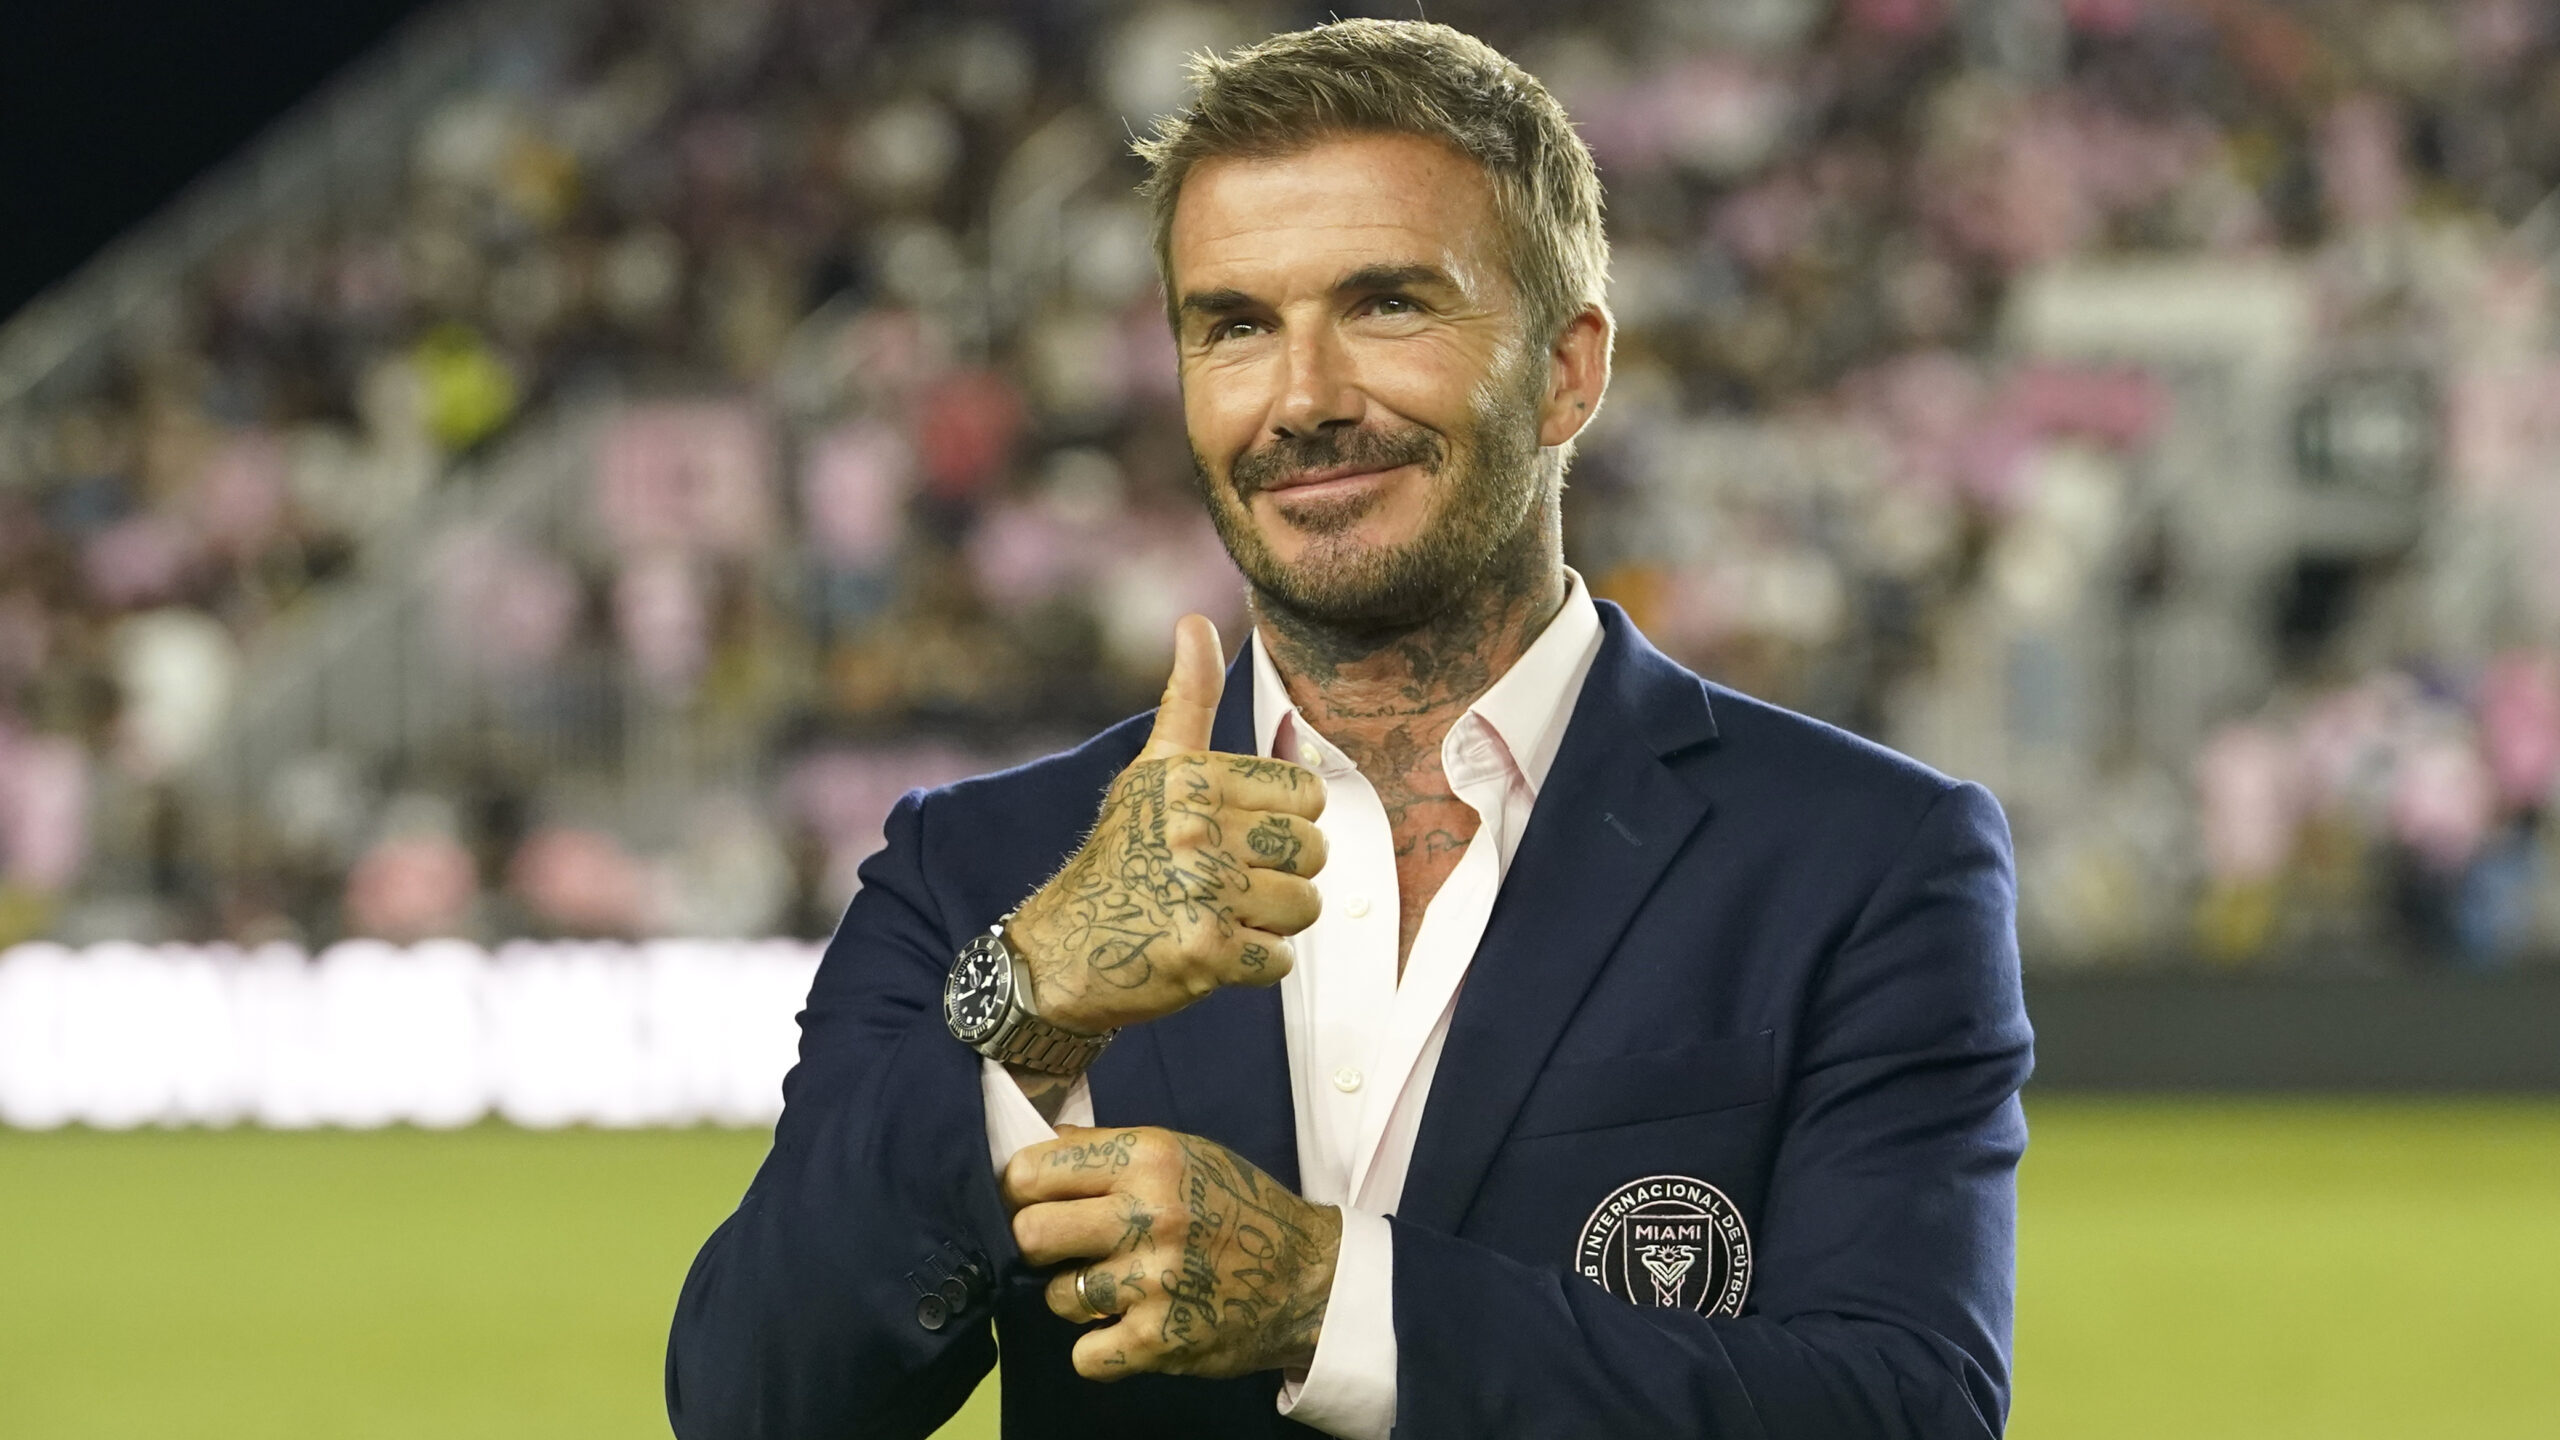 David Beckham reveals hardships he faced while at the peak of his